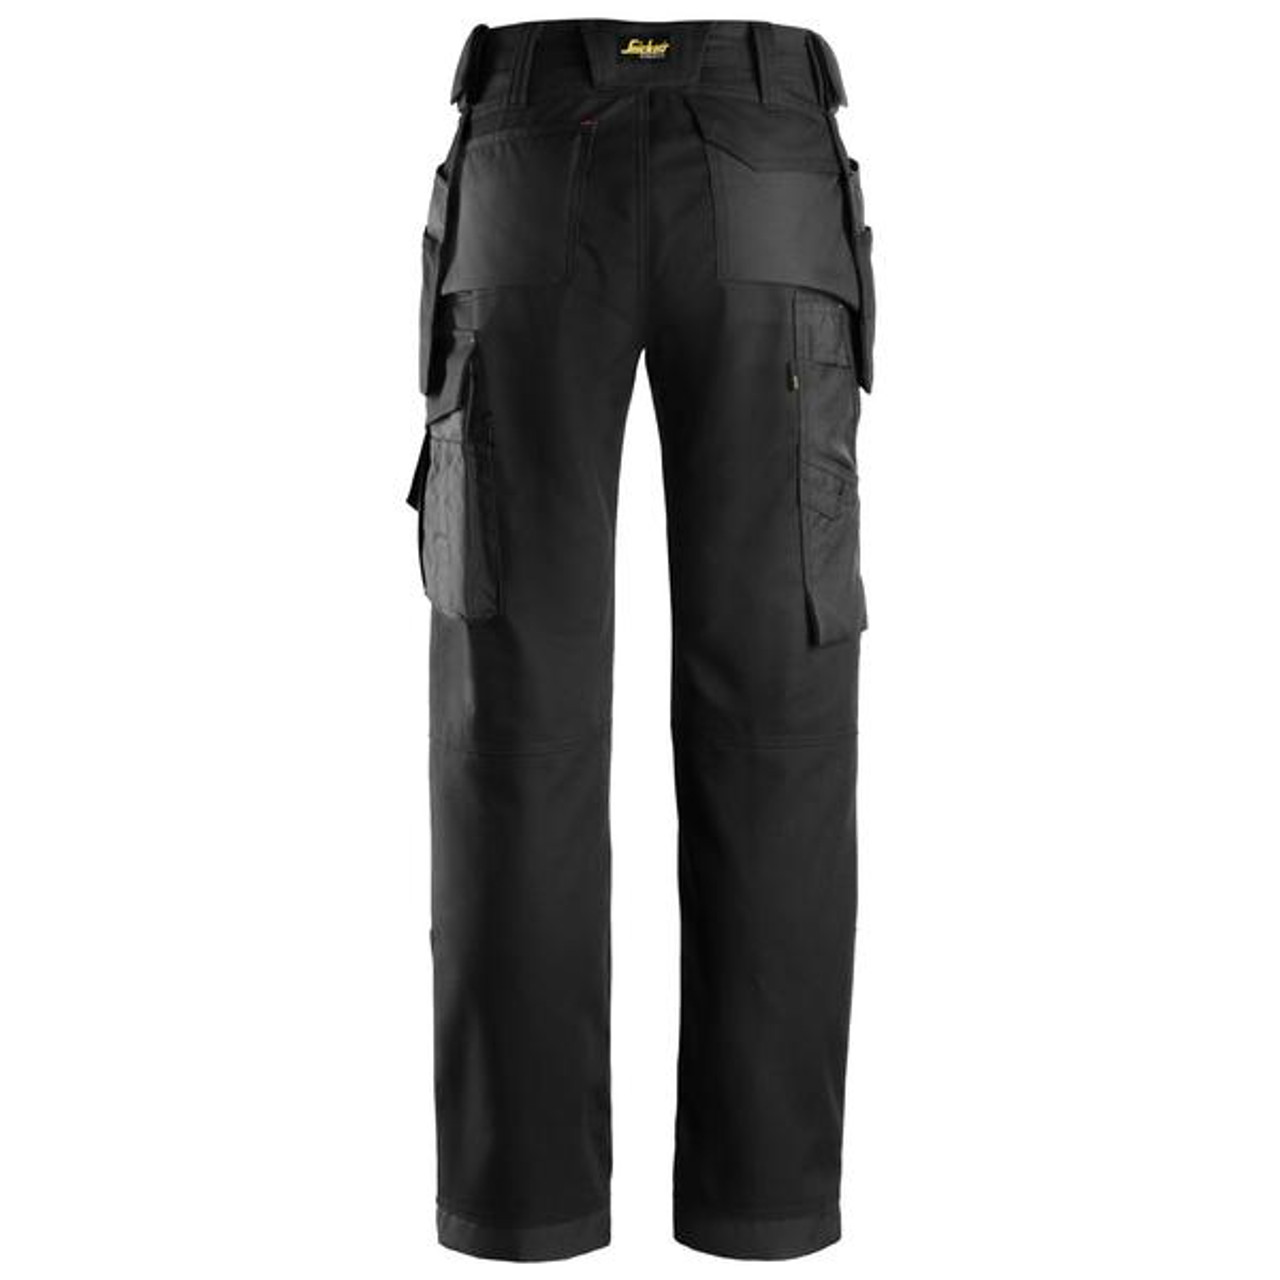 SNICKERS Trousers 3714 with Kneepad Pockets  for Electricians that have Holster Pockets available in Australia, New Zealand and Canada